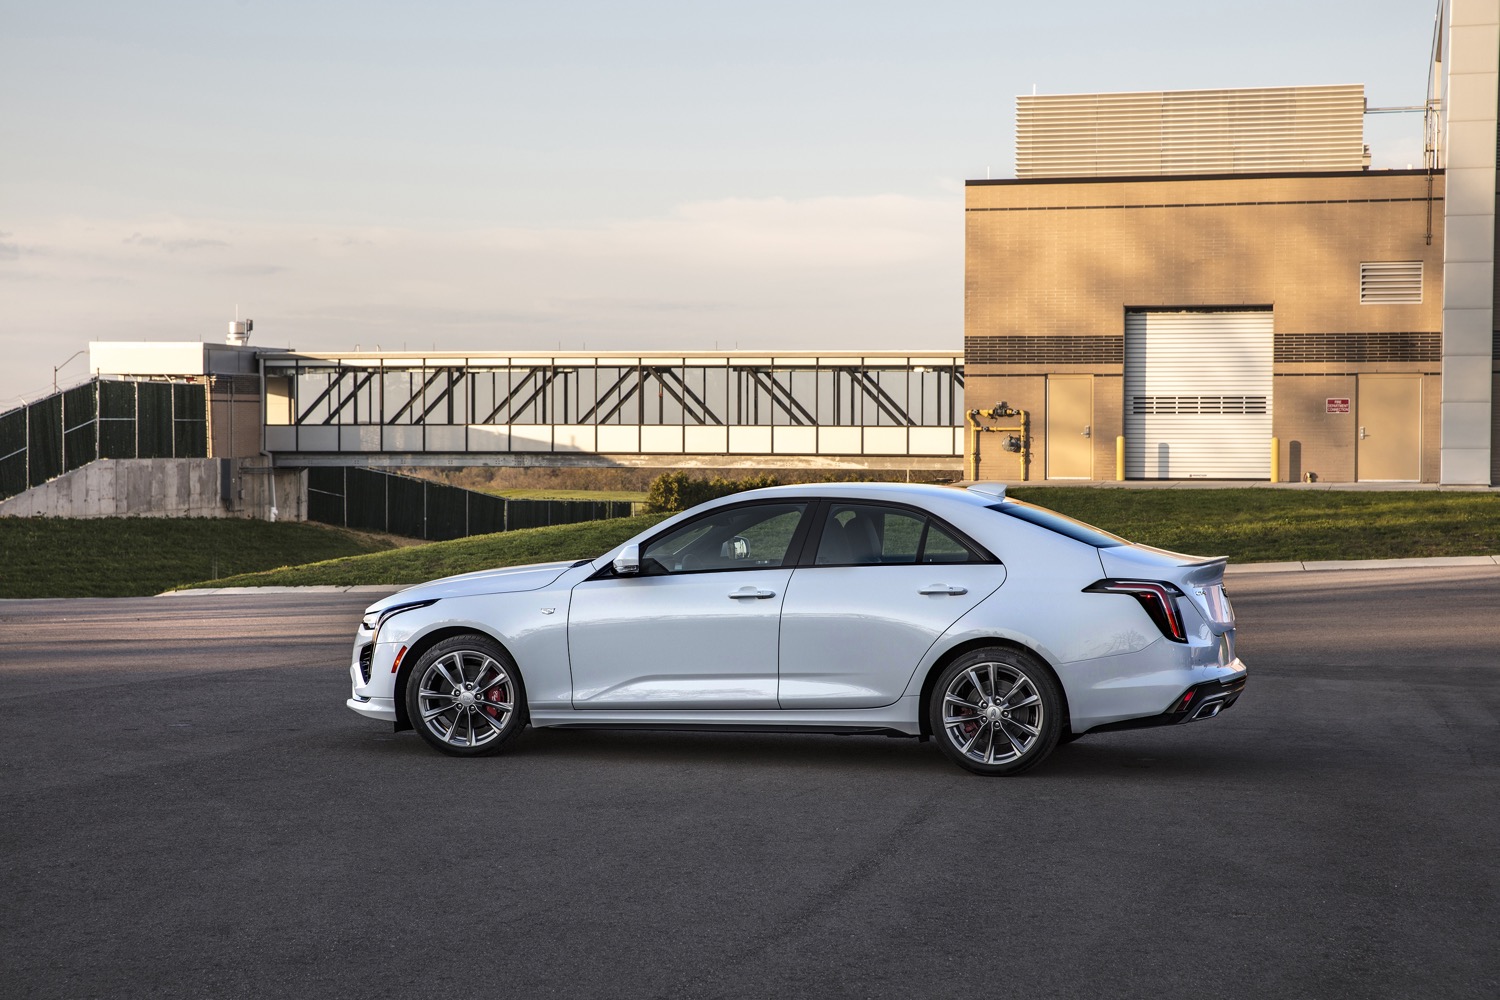 https://cadillacsociety.com/wp-content/uploads/2020/03/2020-Cadillac-CT4-Sport-Exterior-007-side-profile.jpg